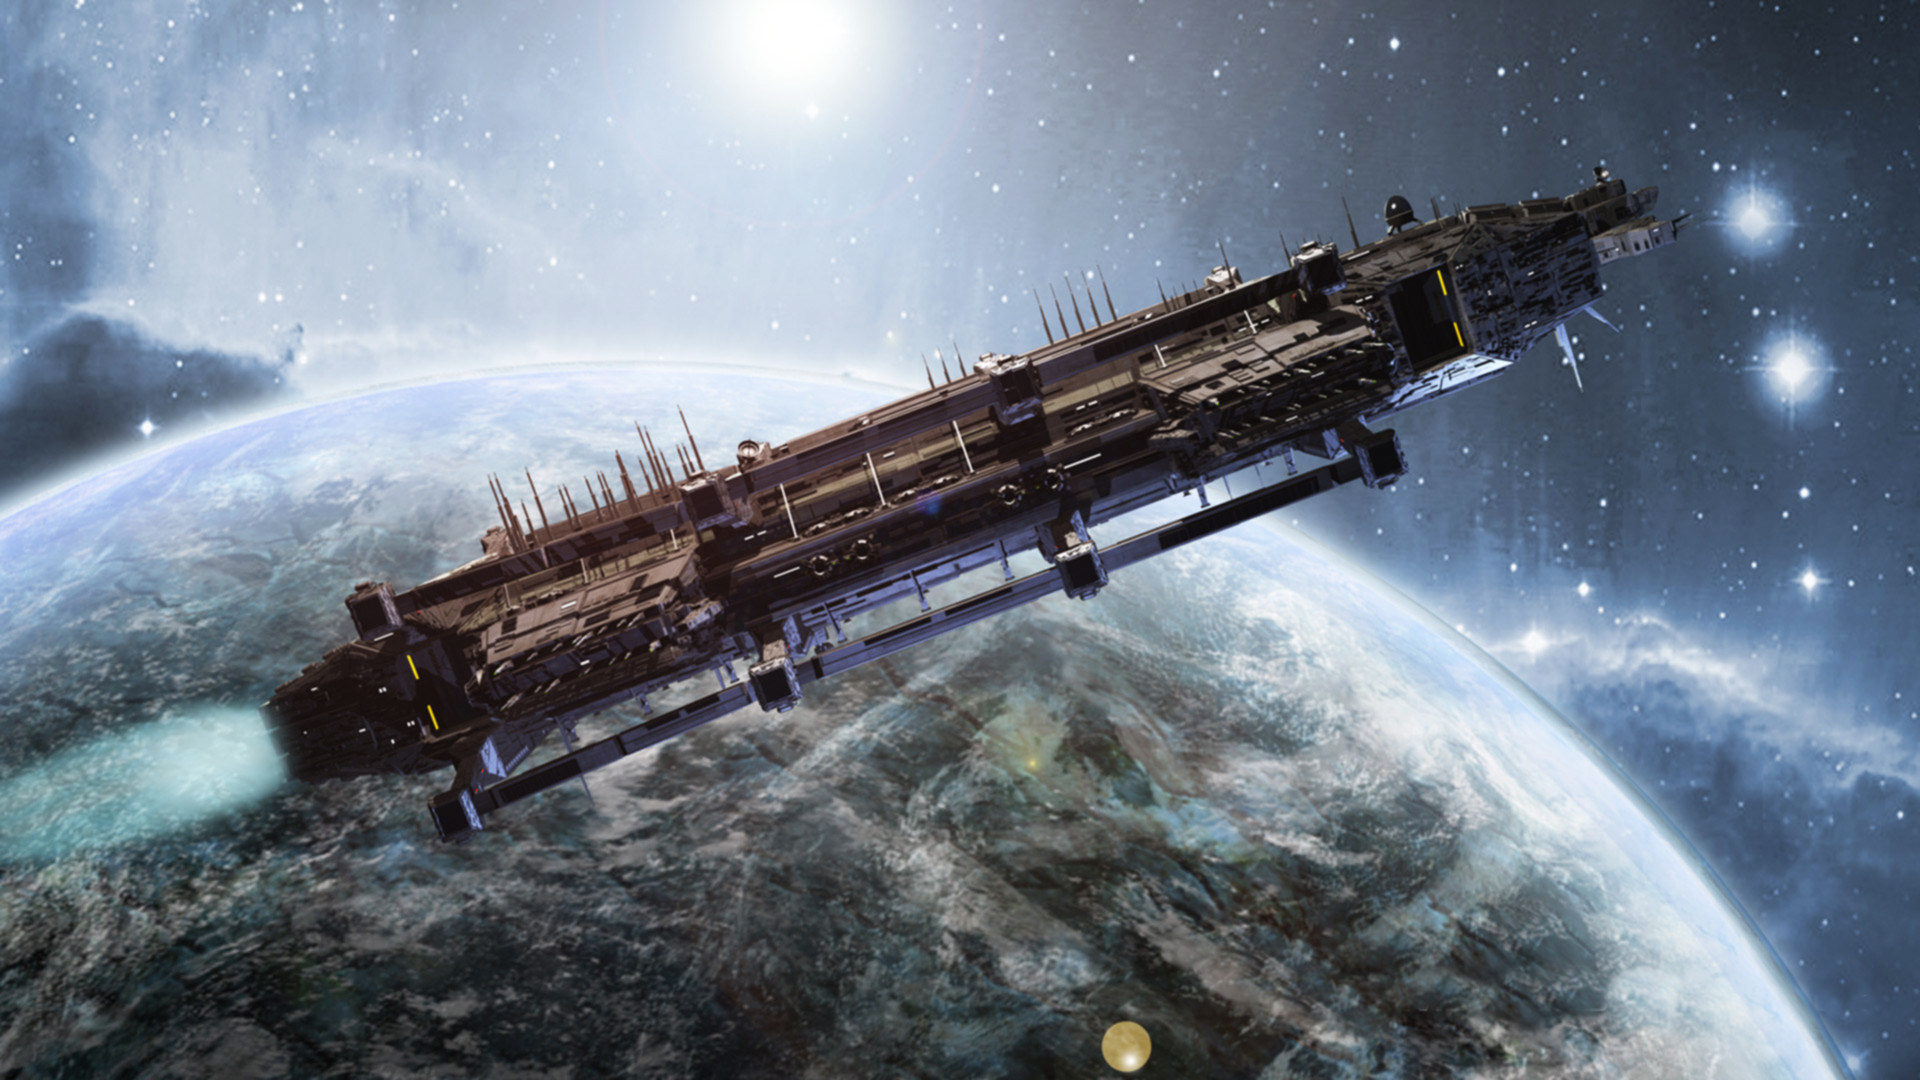 sci fi space station concept art